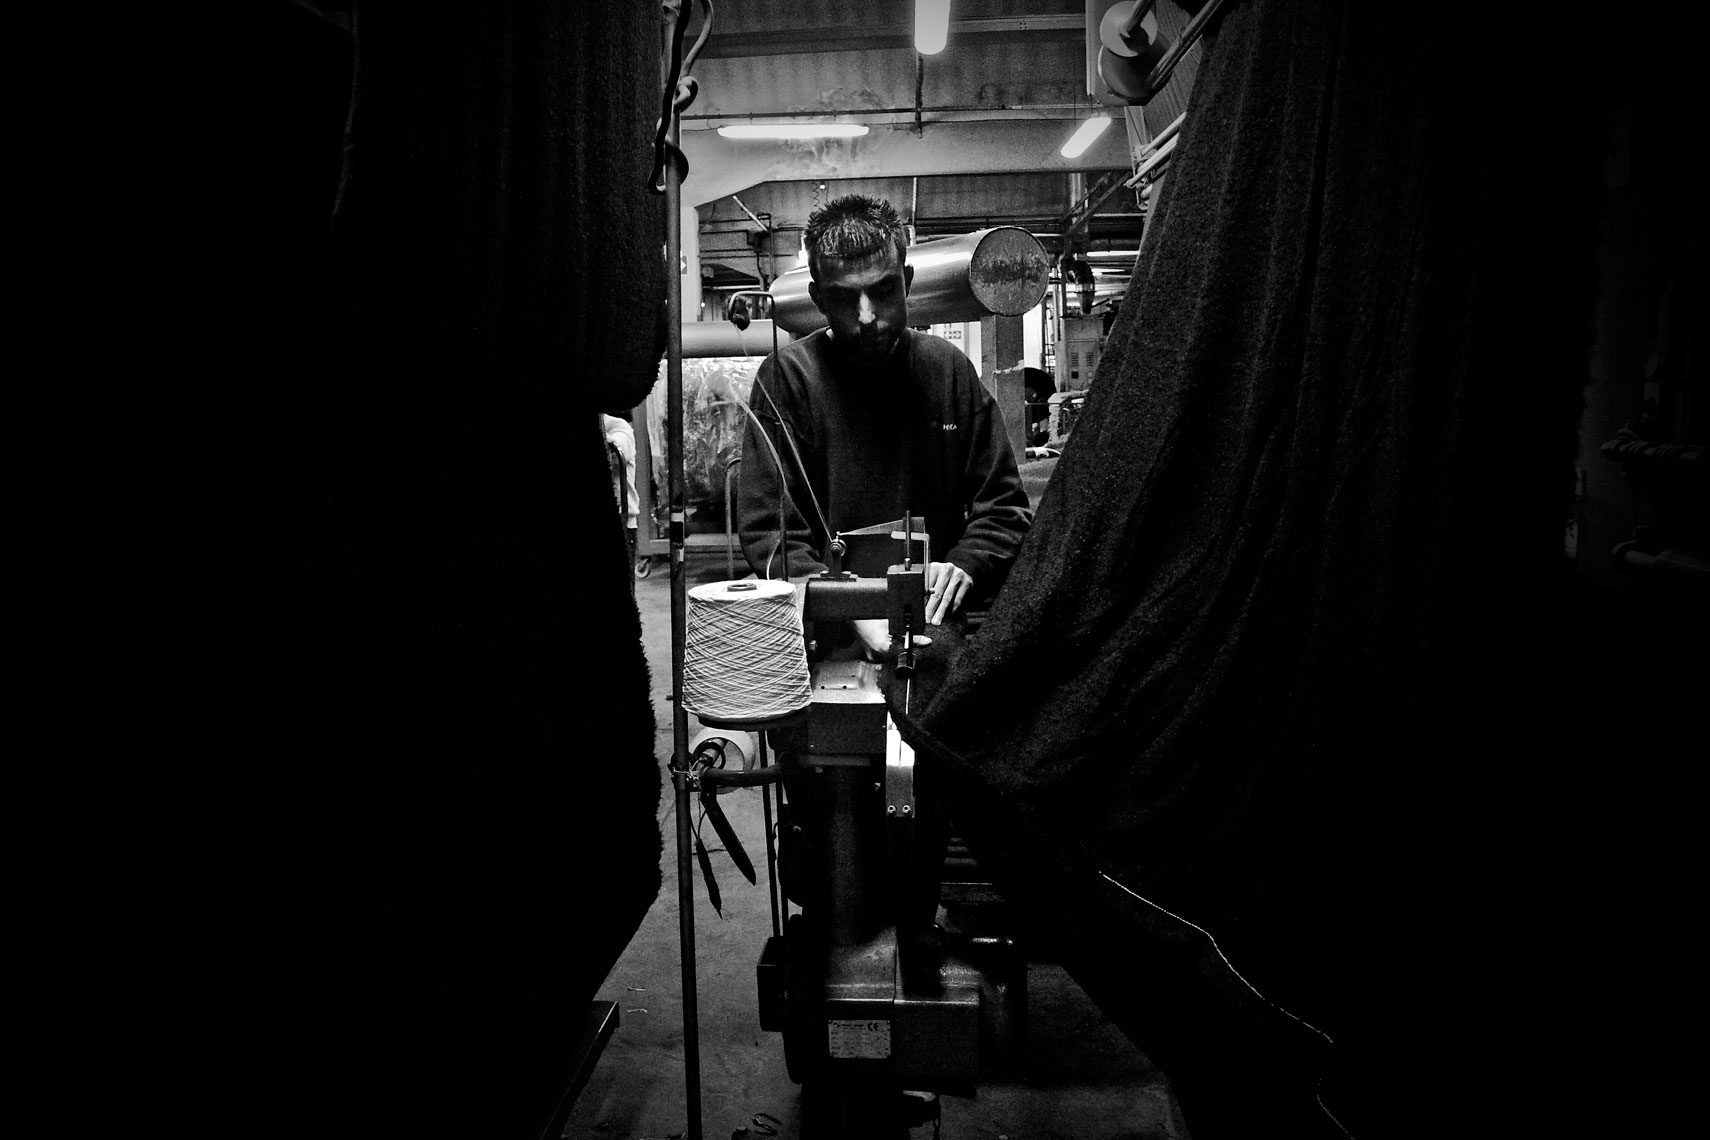 ITALY. Montemurlo (Prato), 31st March 2009. A worker hems a tissue coming out from a finising machine.